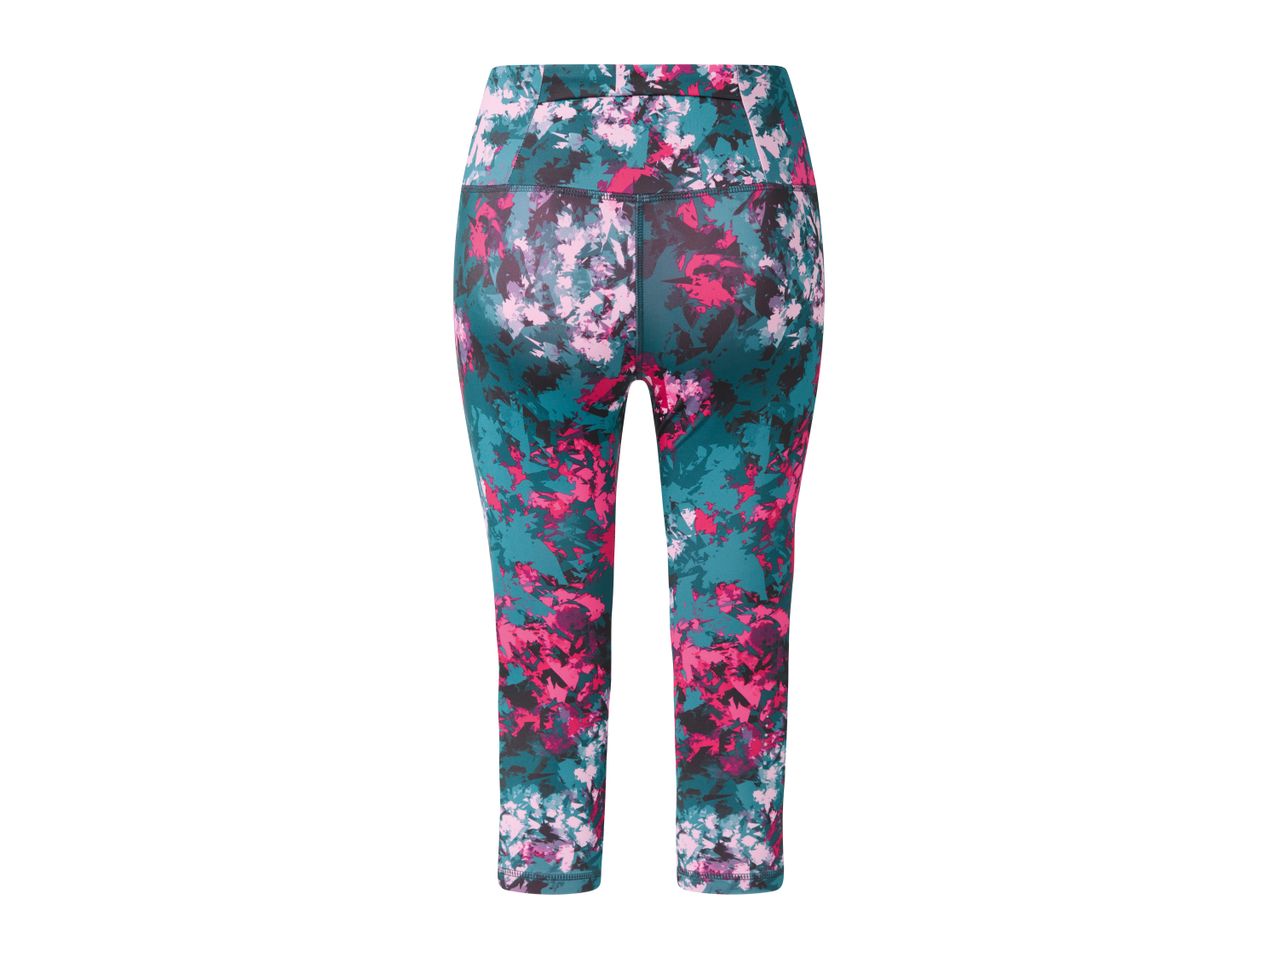 Go to full screen view: Crivit Ladies’ Cropped Sports Leggings - Image 2